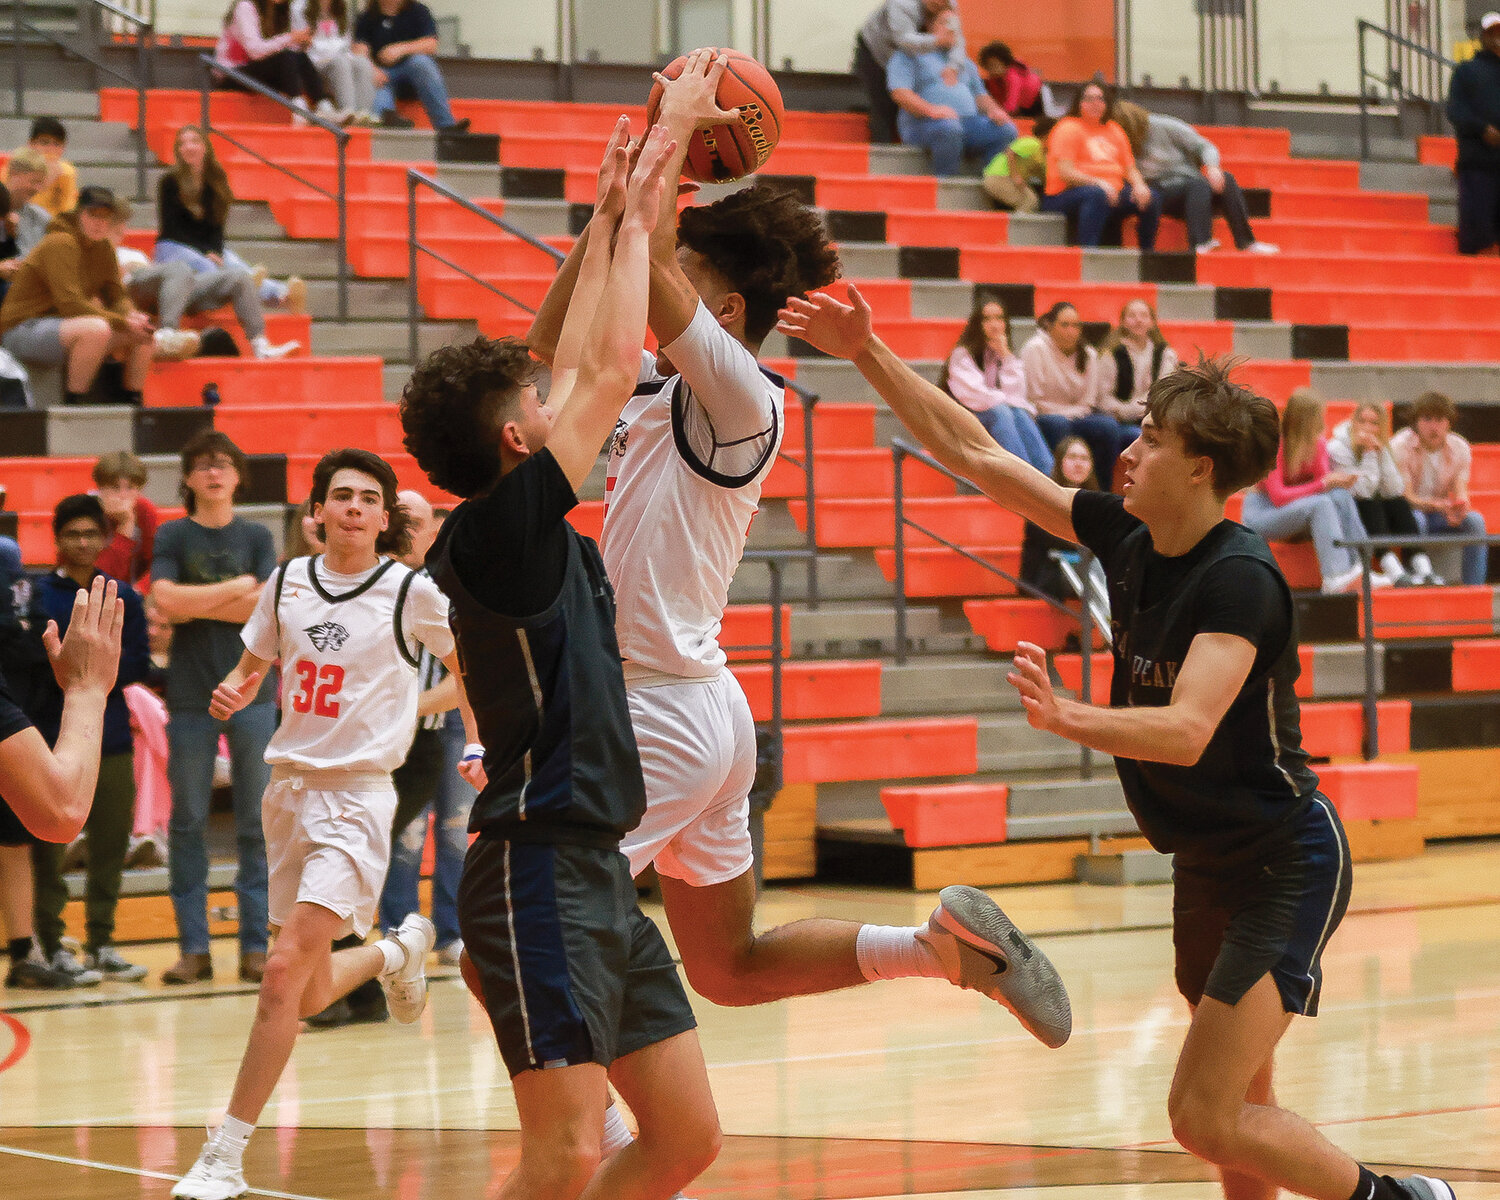 Battle Ground's Austin Ralphs lays it in with two hands in the Tigers’ third game of the week on Friday, Dec. 1. The Tigers lost, 69-36, to Glacier Peak High School.